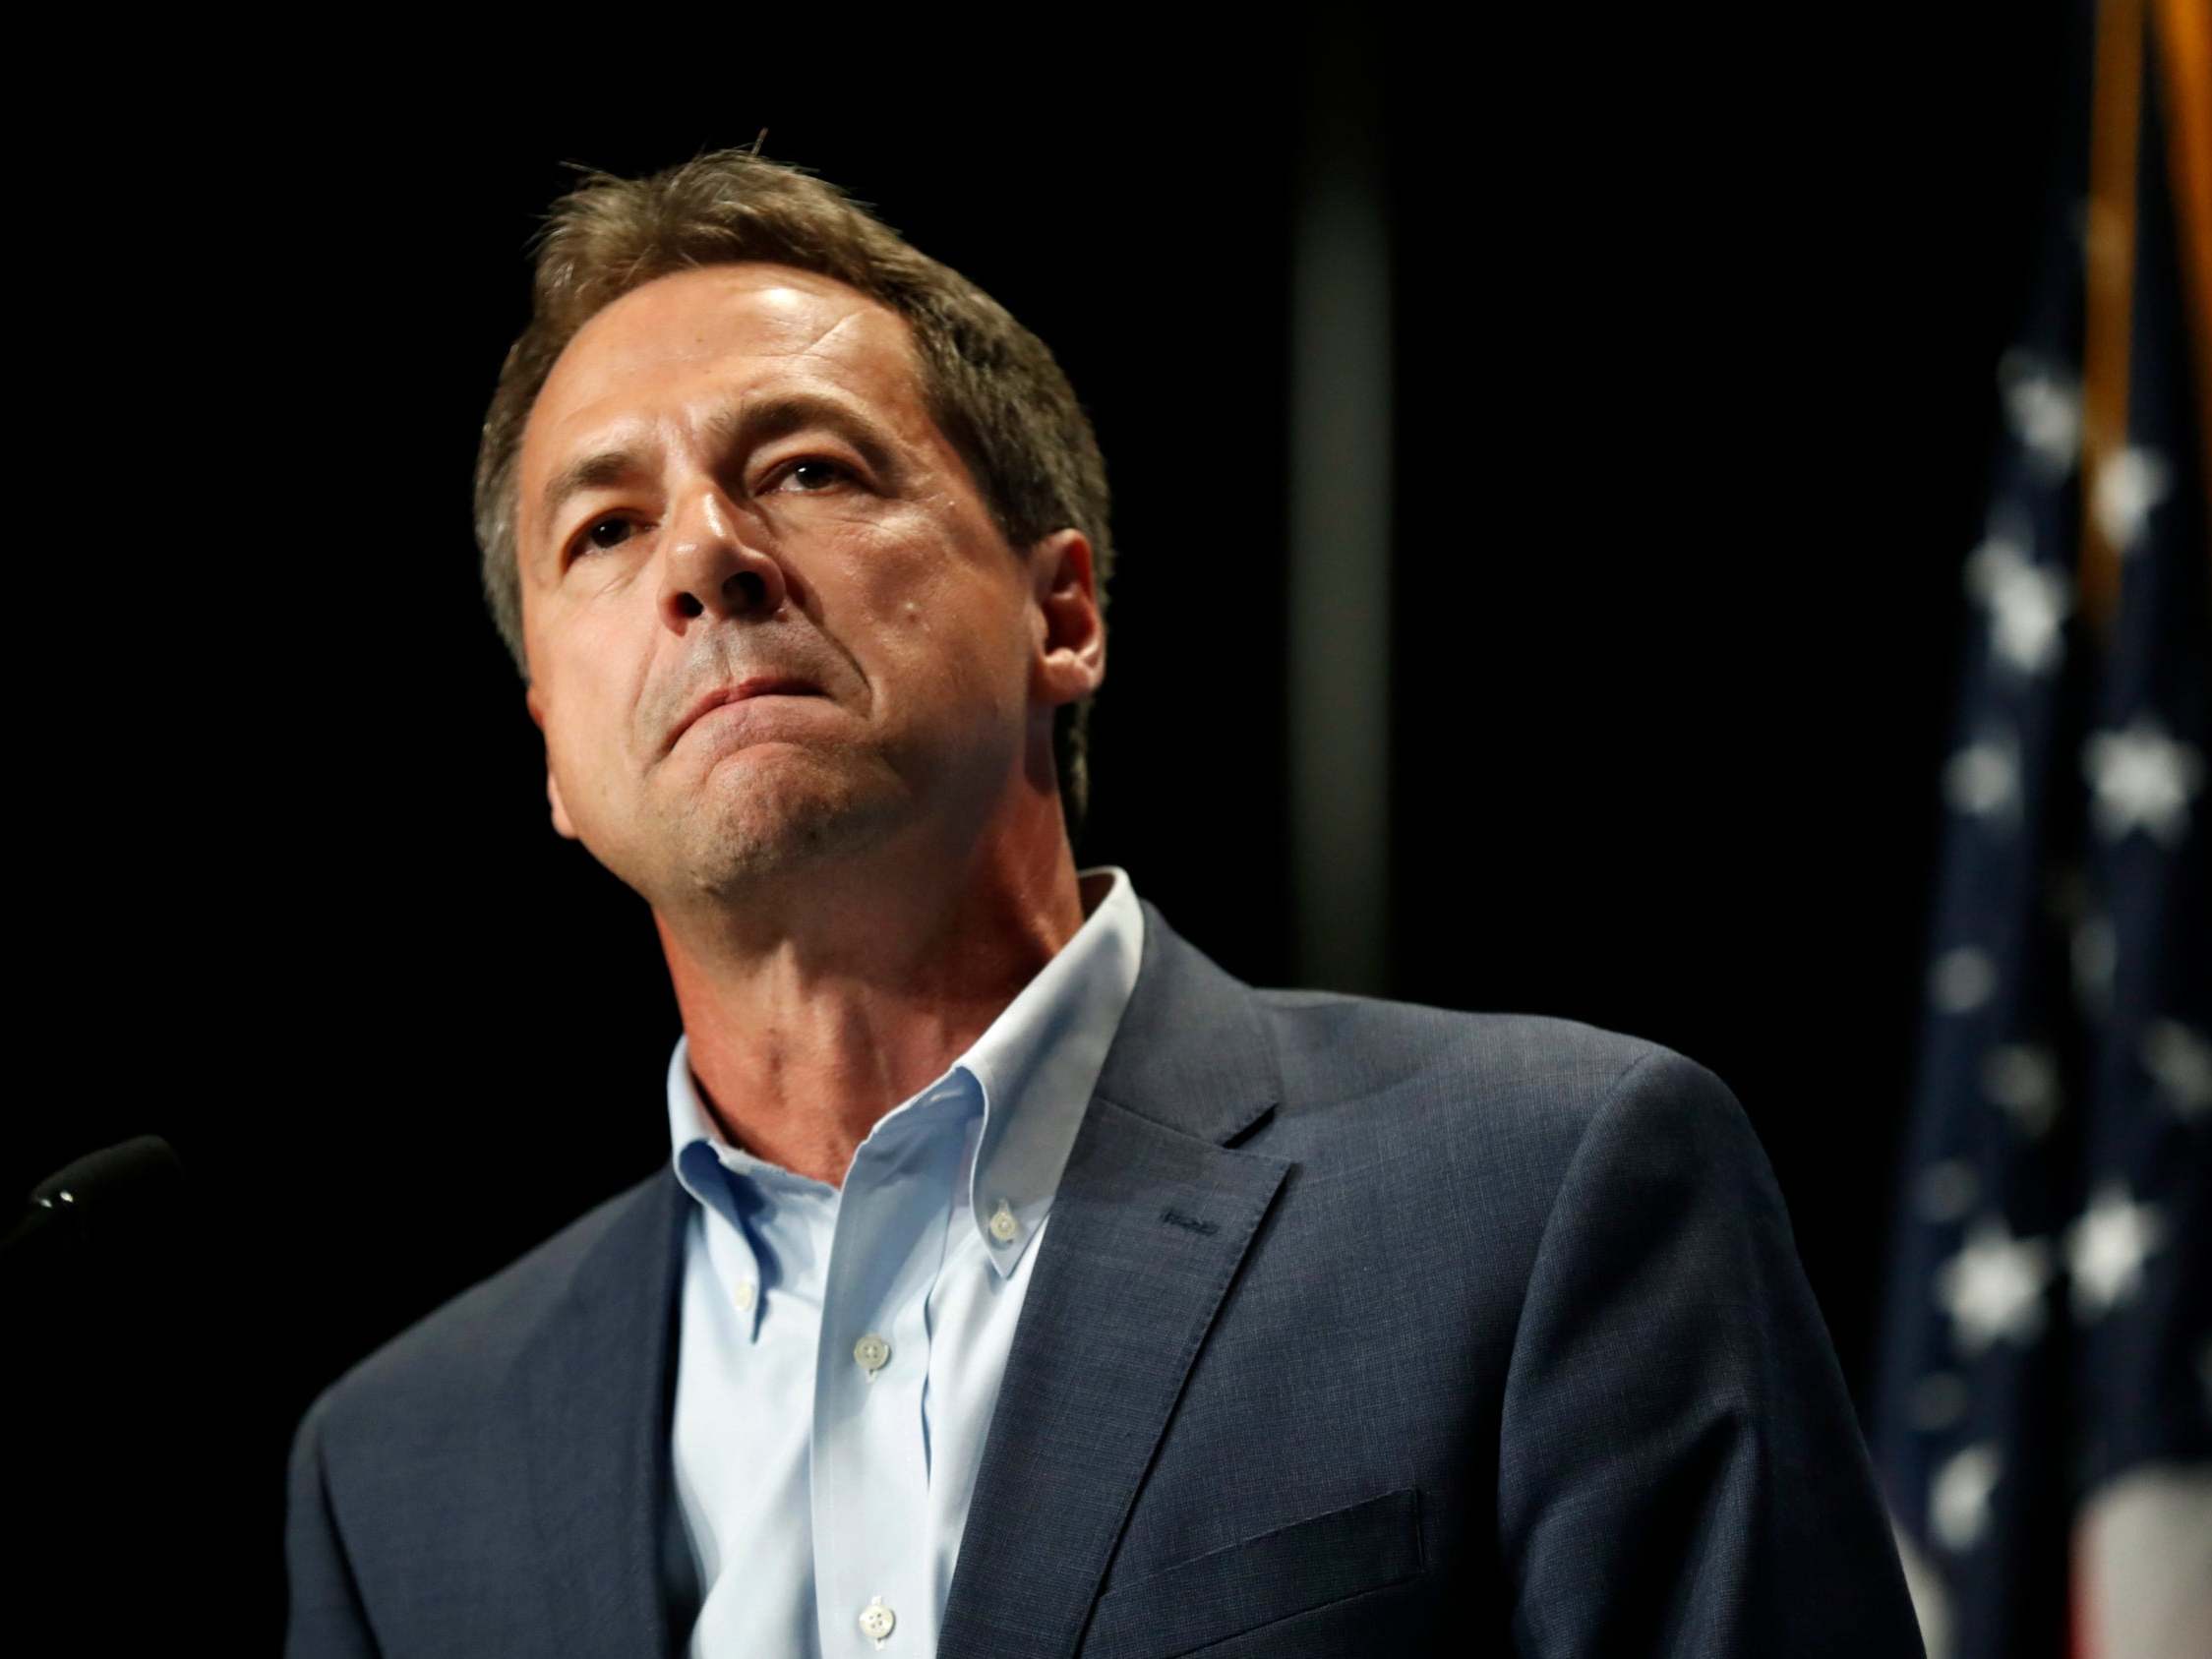 'I'm the only one who has actually won in a Trump state': Steve Bullock didn't make the debate stage, but has no regrets